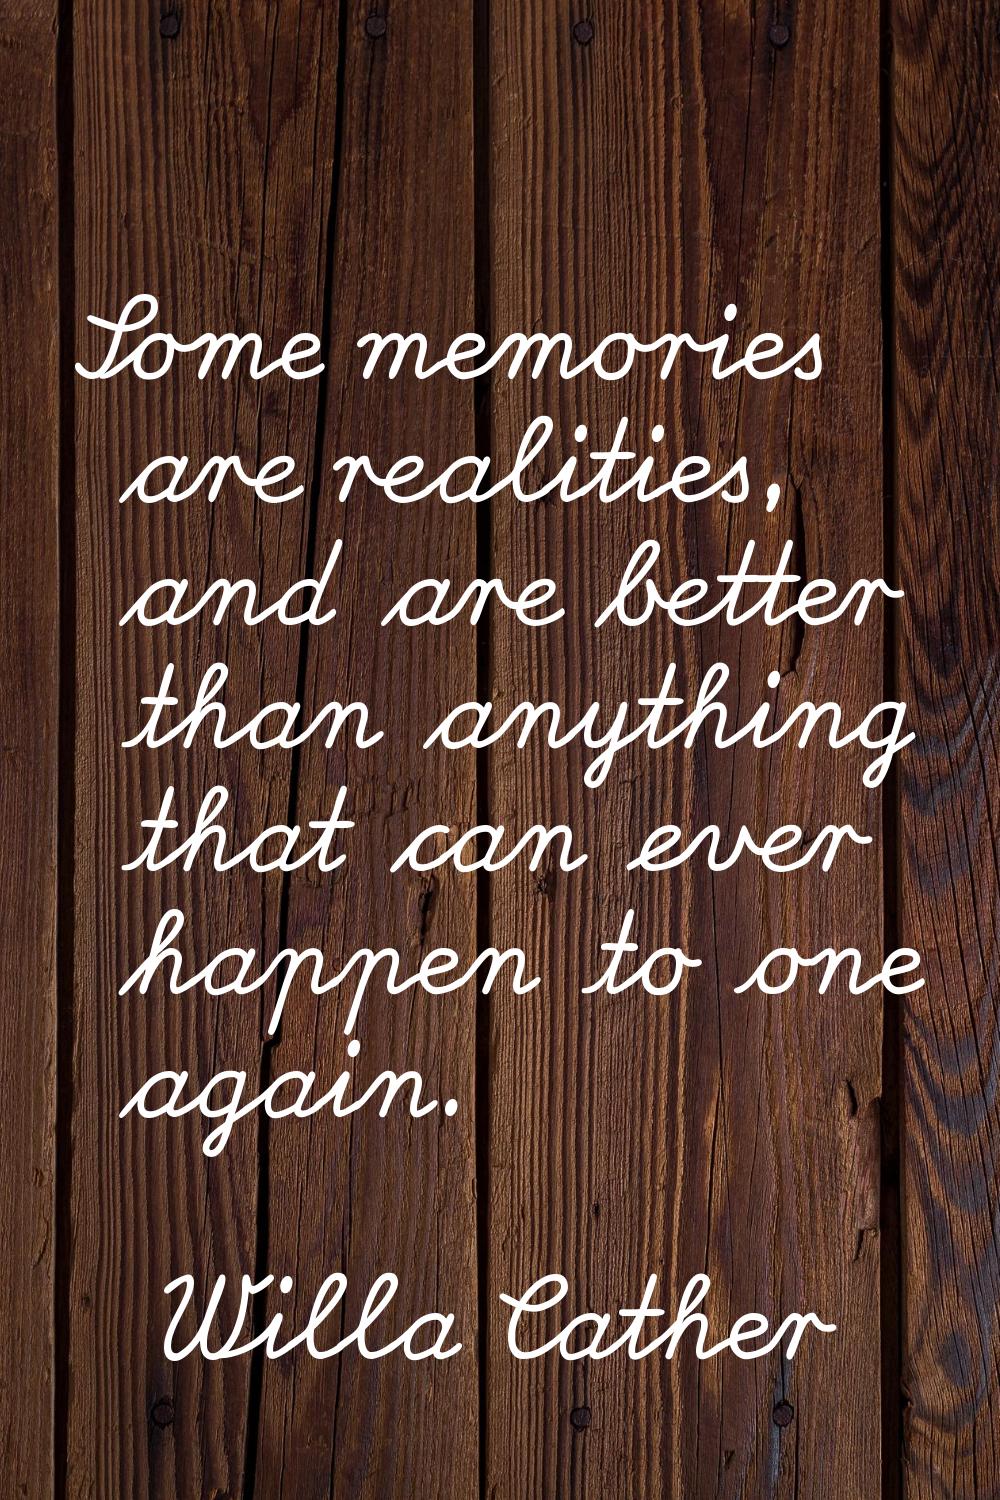 Some memories are realities, and are better than anything that can ever happen to one again.